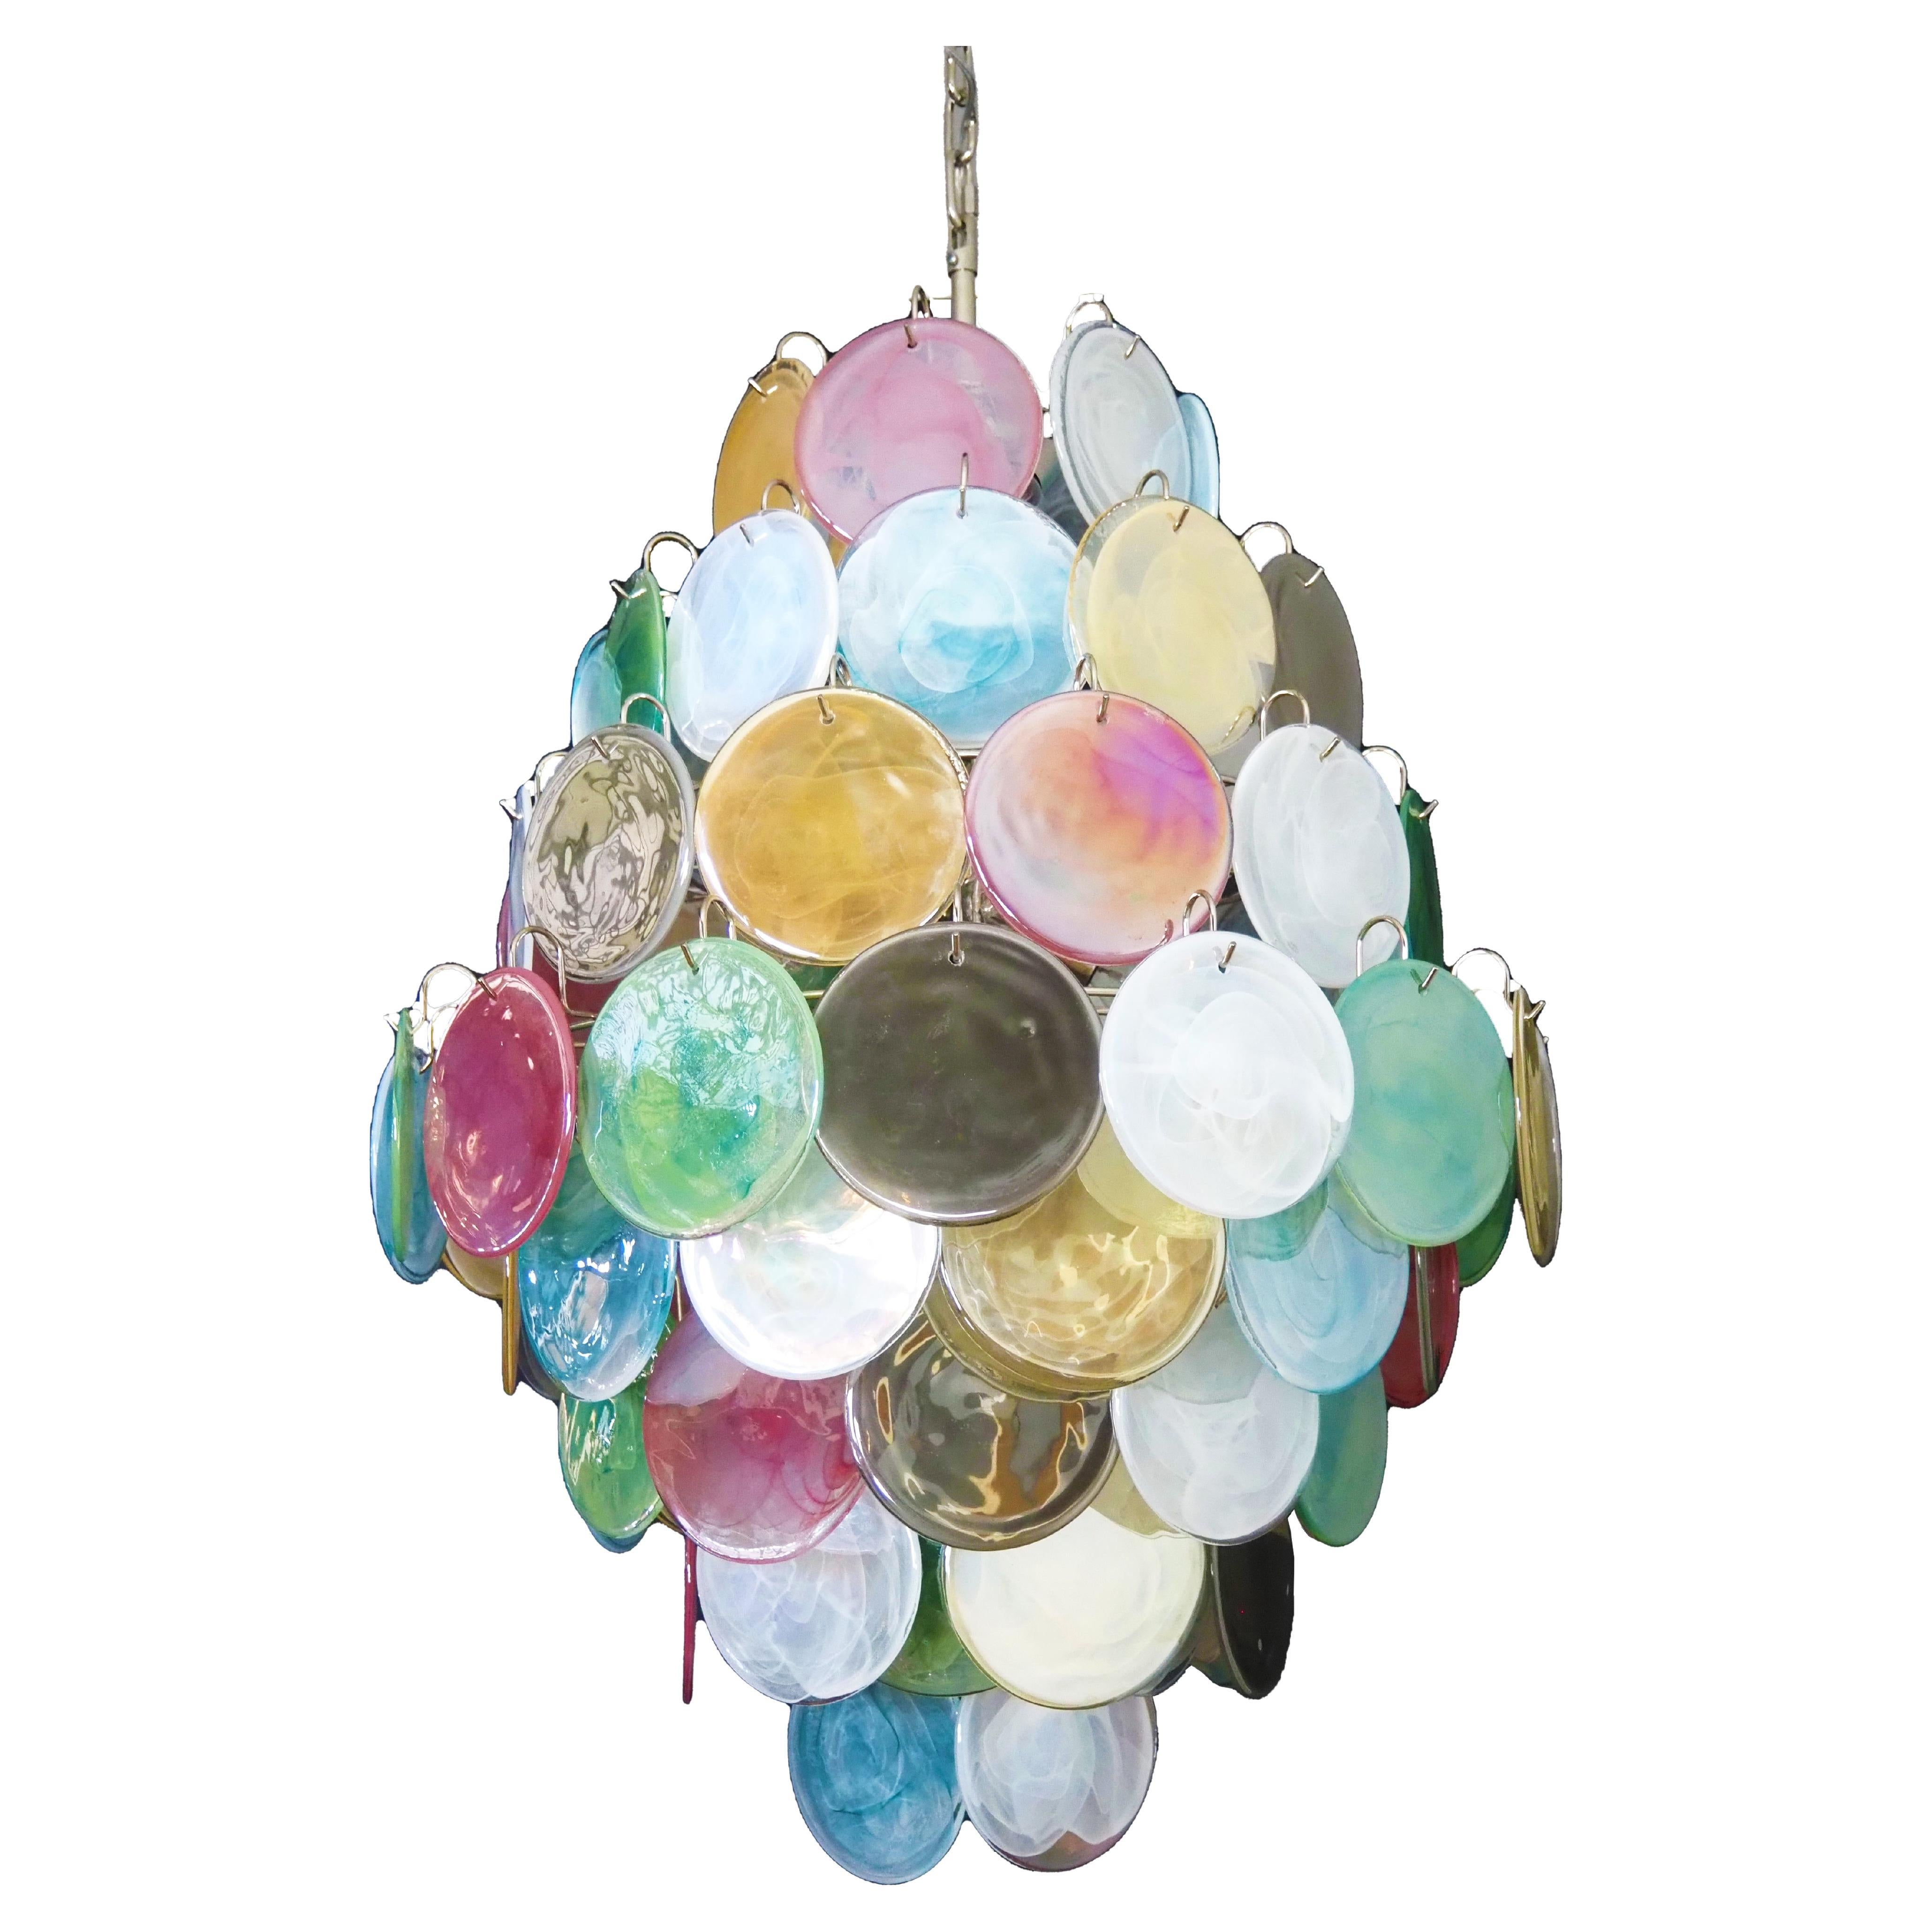 Vintage Italian Murano chandelier in Vistosi style. The chandelier has 87 fantastic multicolored alabaster iridescent glasses in a nickel metal frame.
Period: late XX century
Dimensions: 67,80 inches (175 cm) height with chain; 40,70 inches (105 cm)